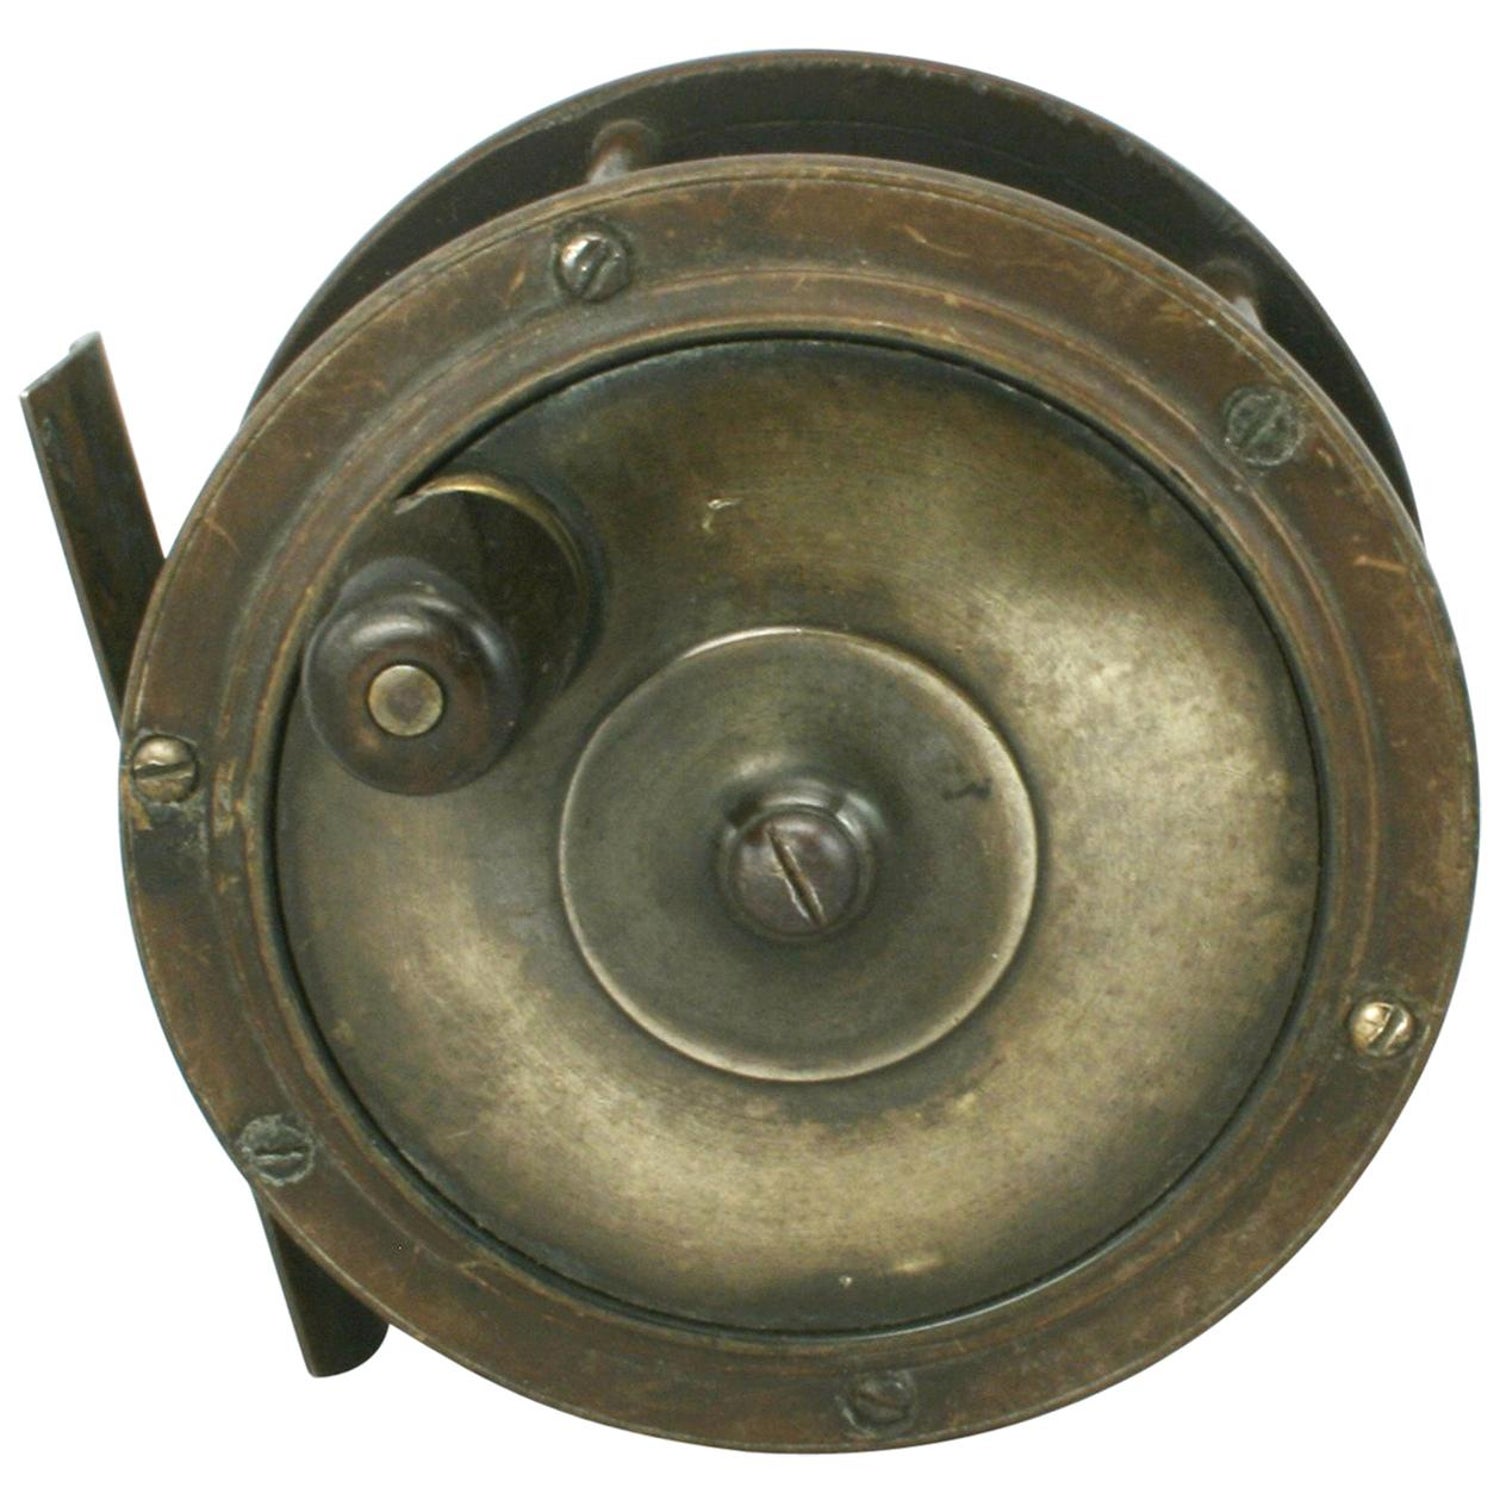 Antique Brass Fly Fishing Reels - 2 For Sale on 1stDibs